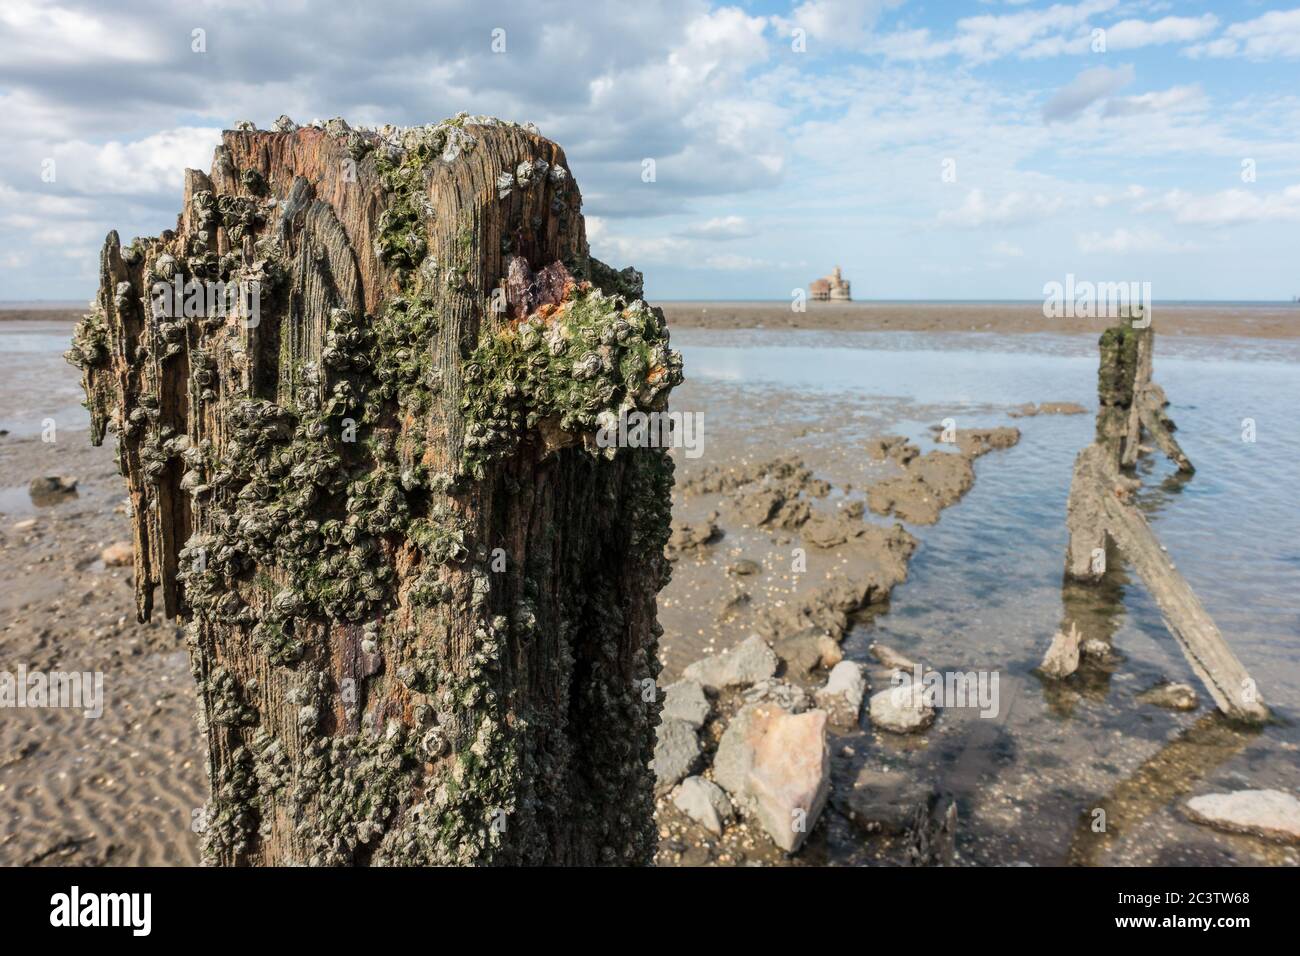 Looking acros the River Thames to the Grain Battery Tower Stock Photo